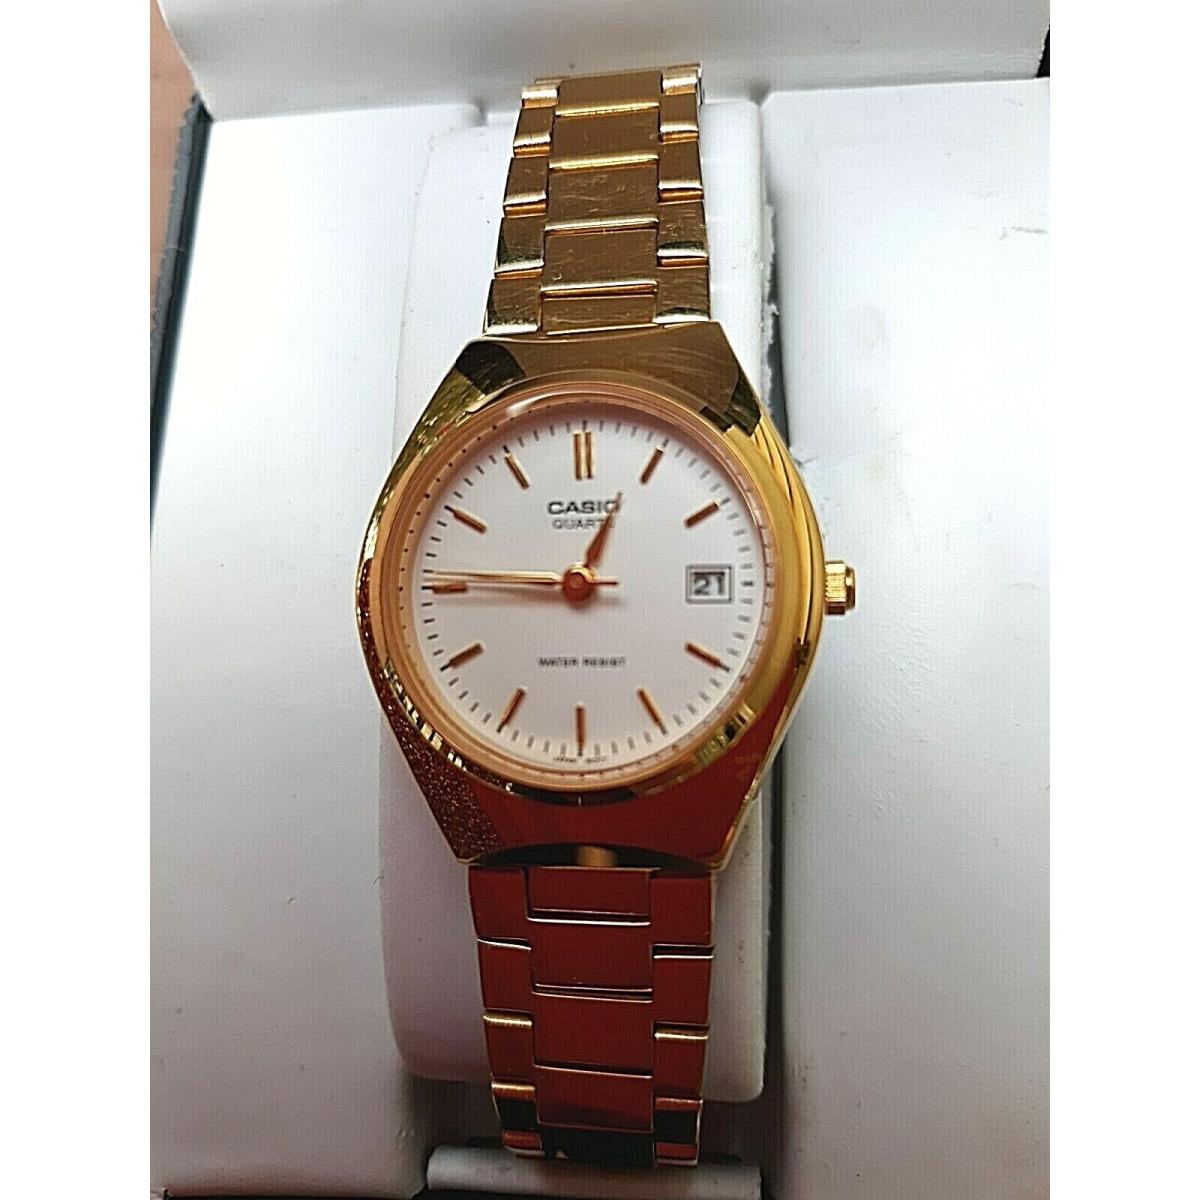 Casio Women`s Gold Plated Date Quartz Fashion Classic Analog Watch LTP-1170N-9A - Dial: White, Band: Yellow Gold